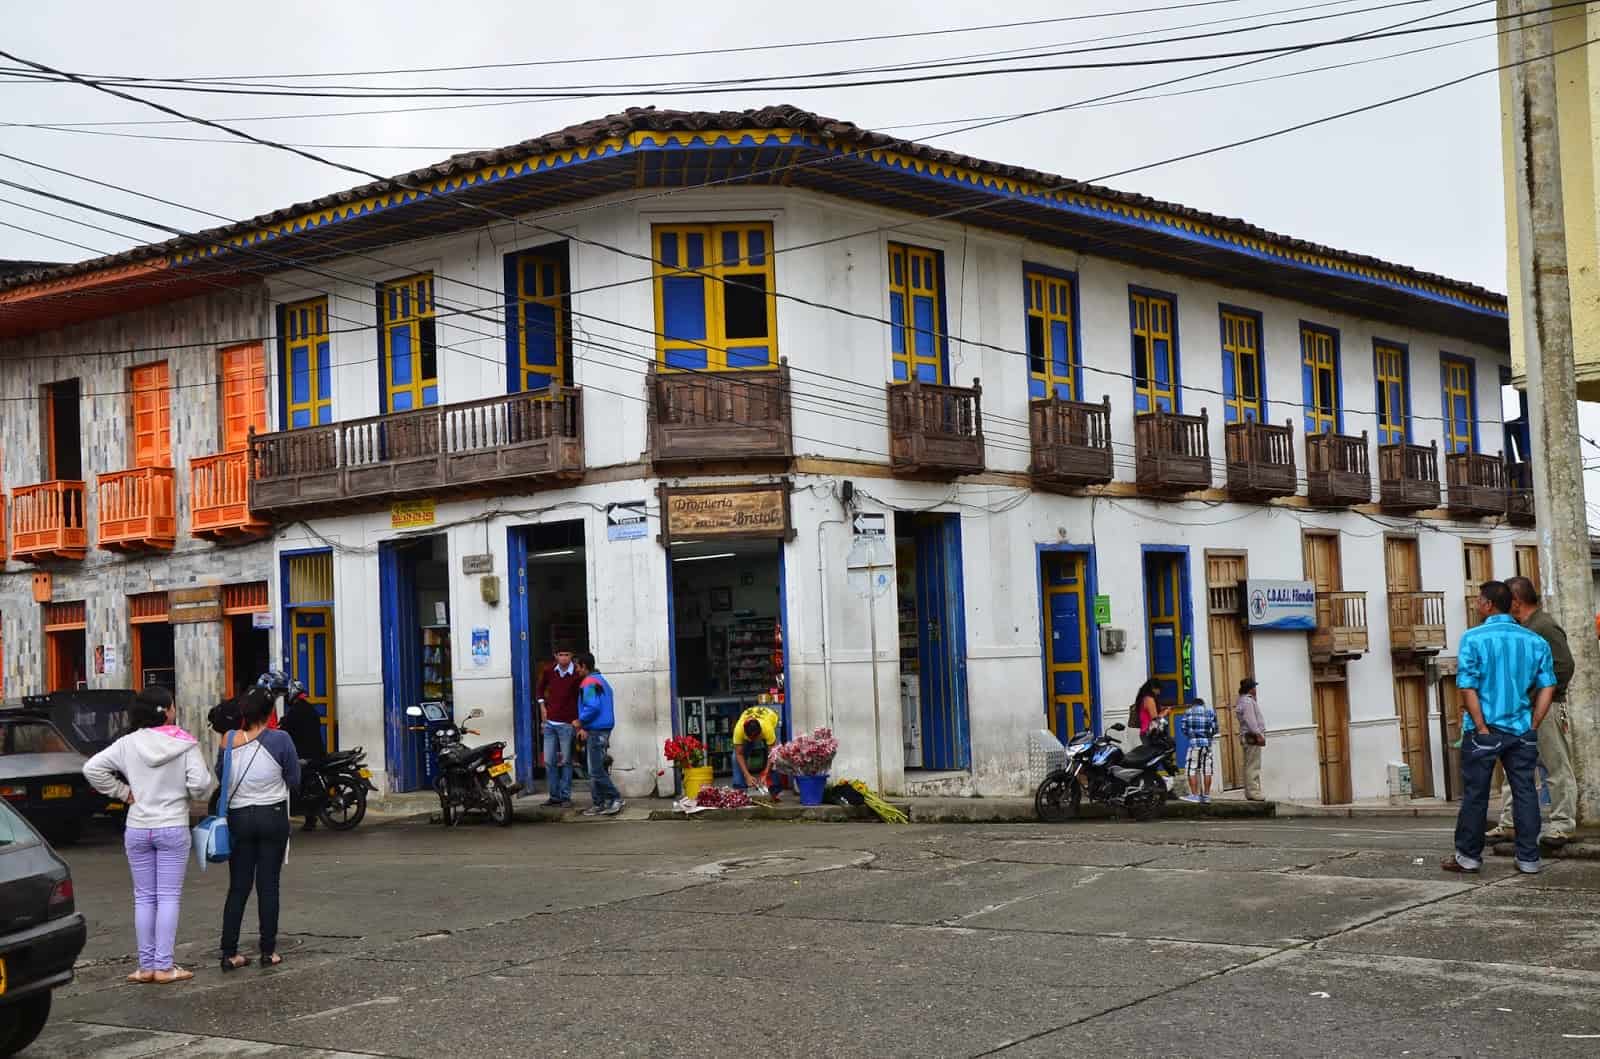 Building on the plaza in September 2014 in Filandia, Quindío, Colombia